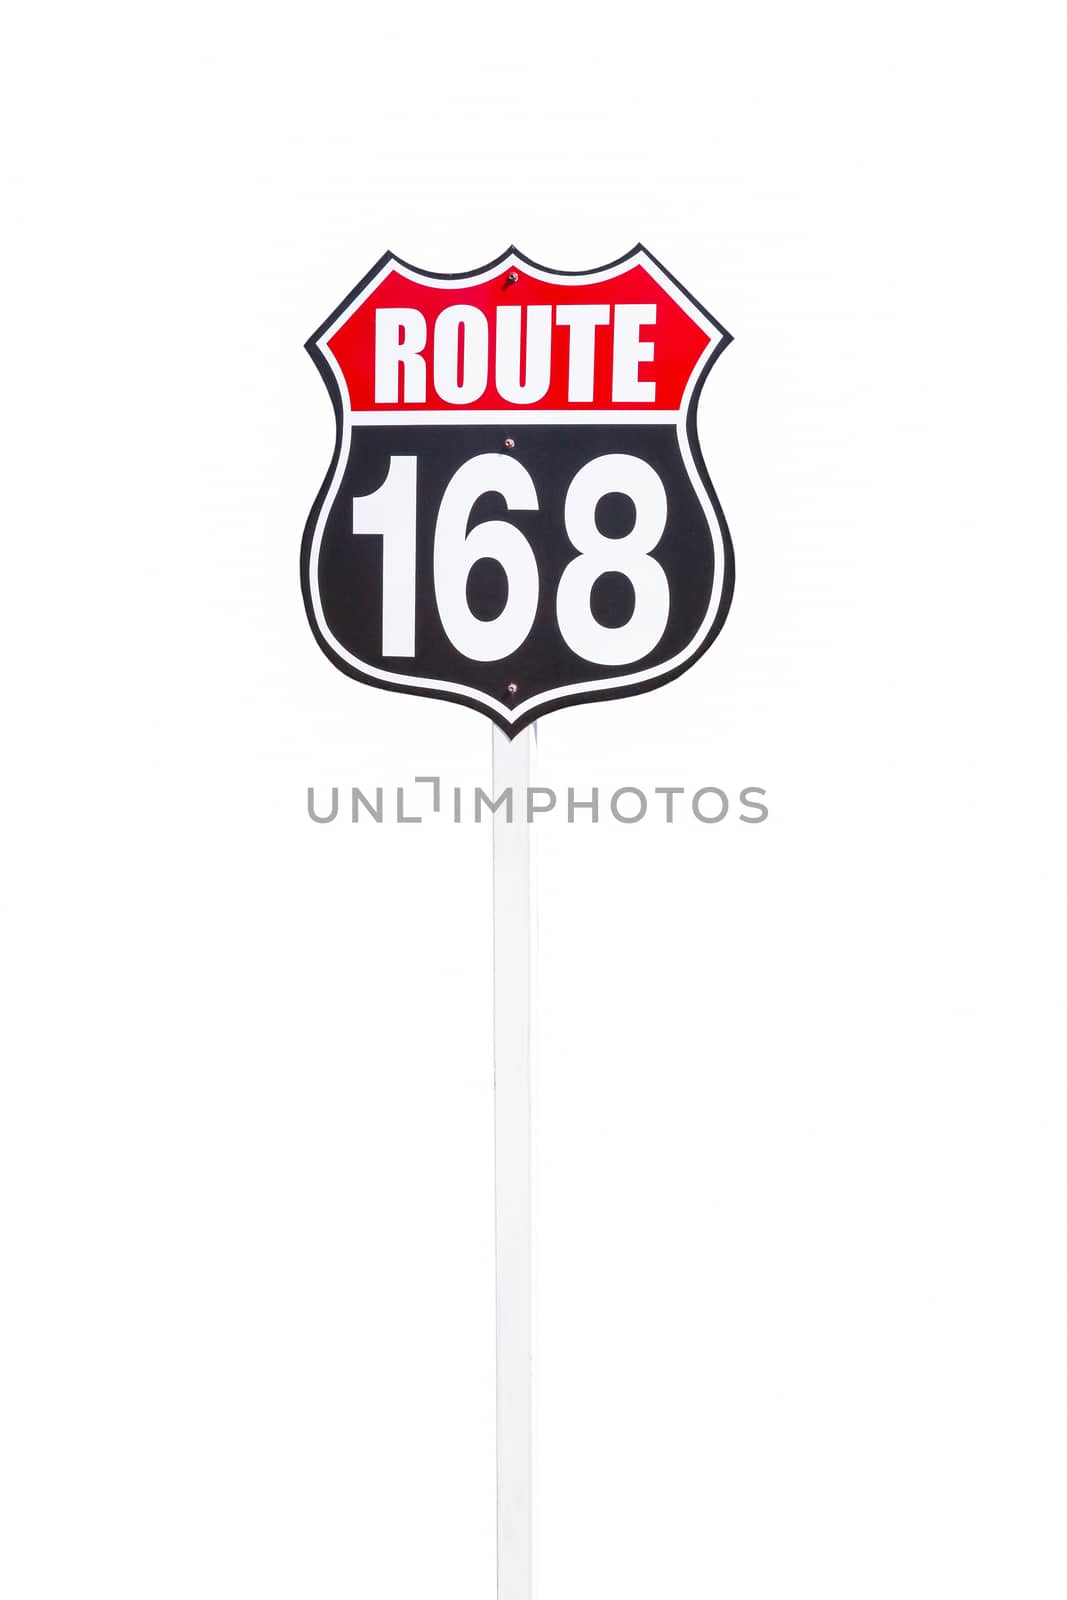 vintage route 168 road  sign isolated on white background